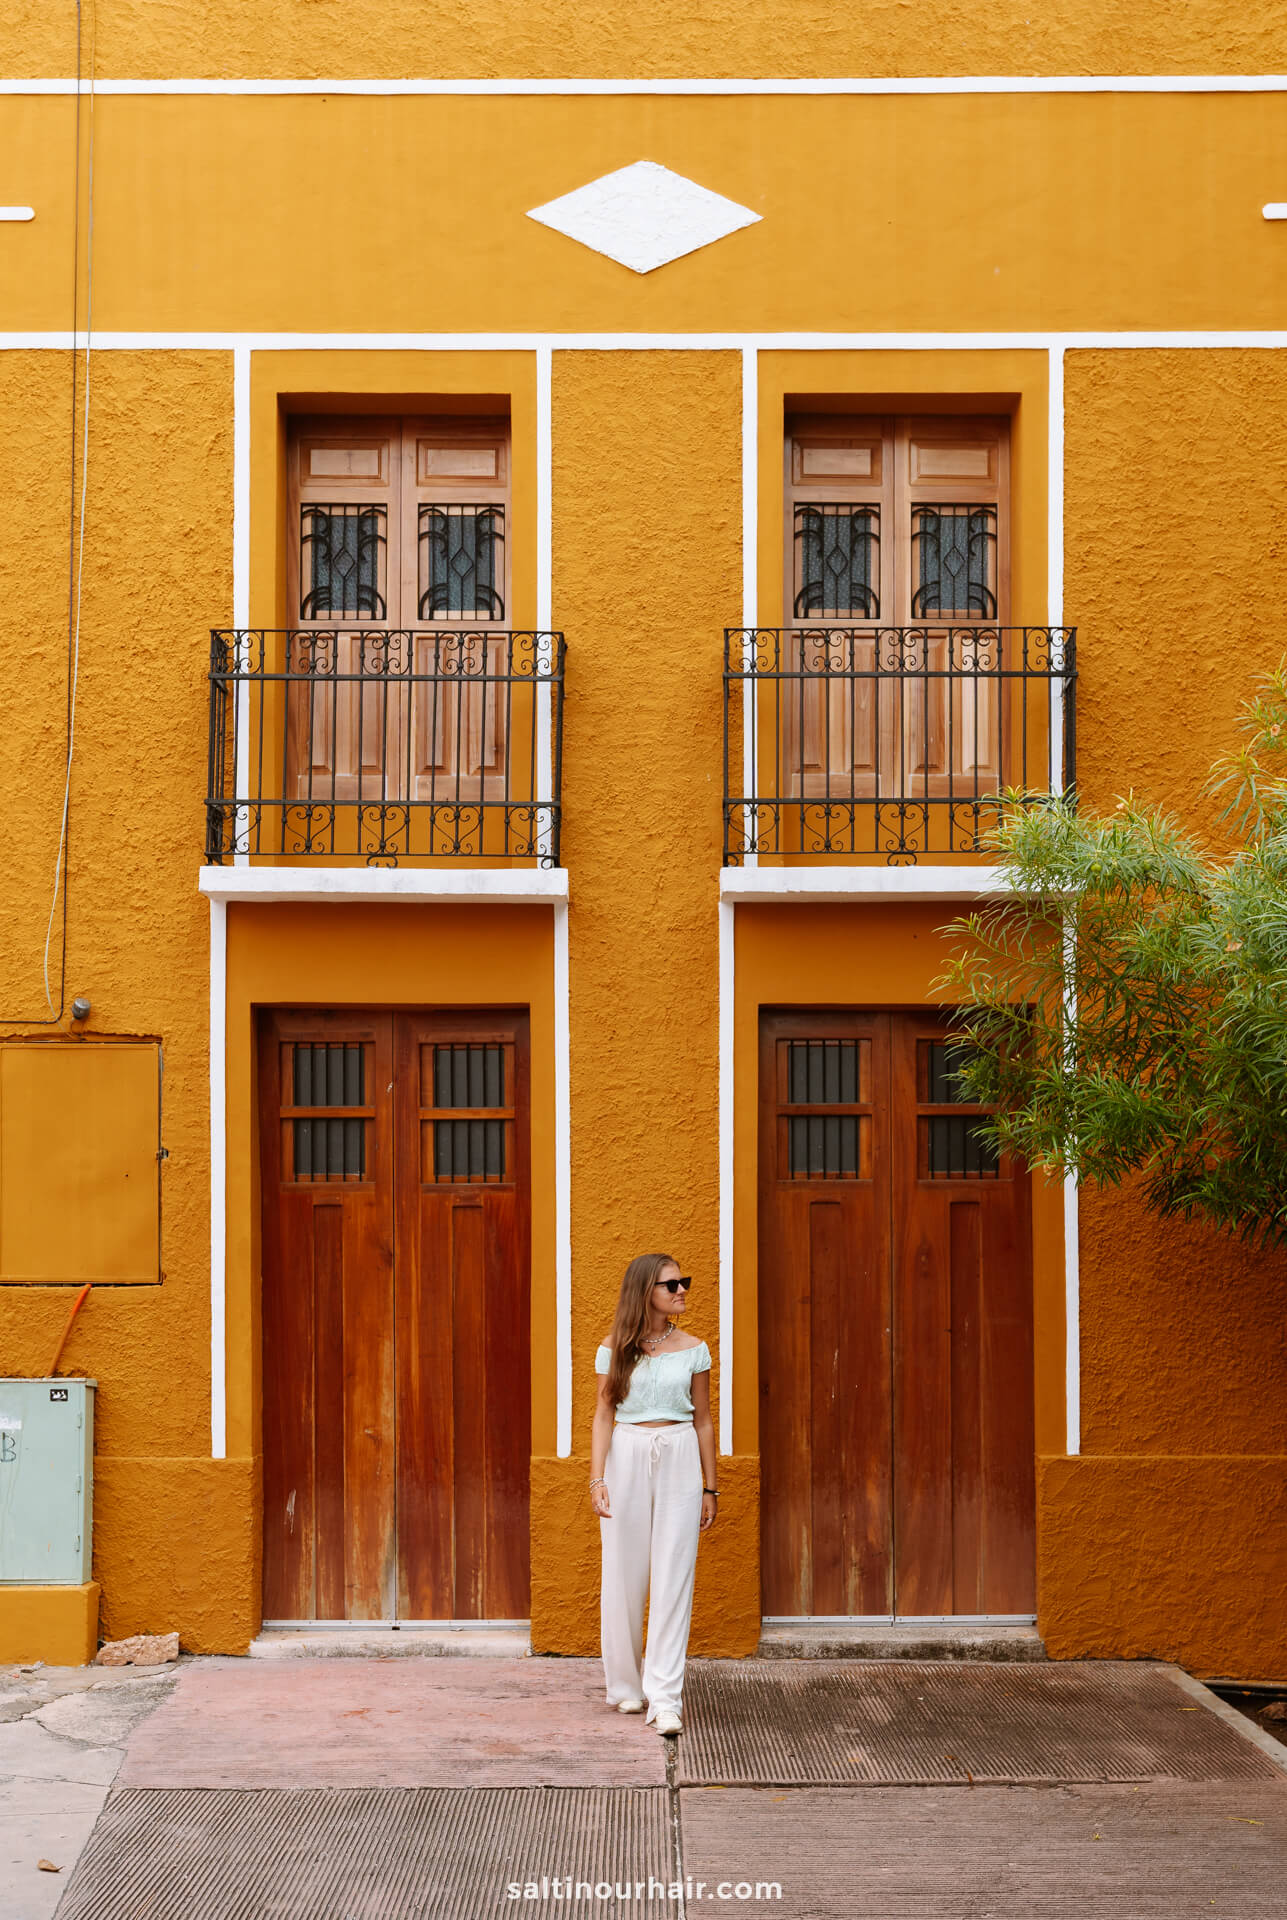 Candelaria neighbourhood things to do in Valladolid mexico